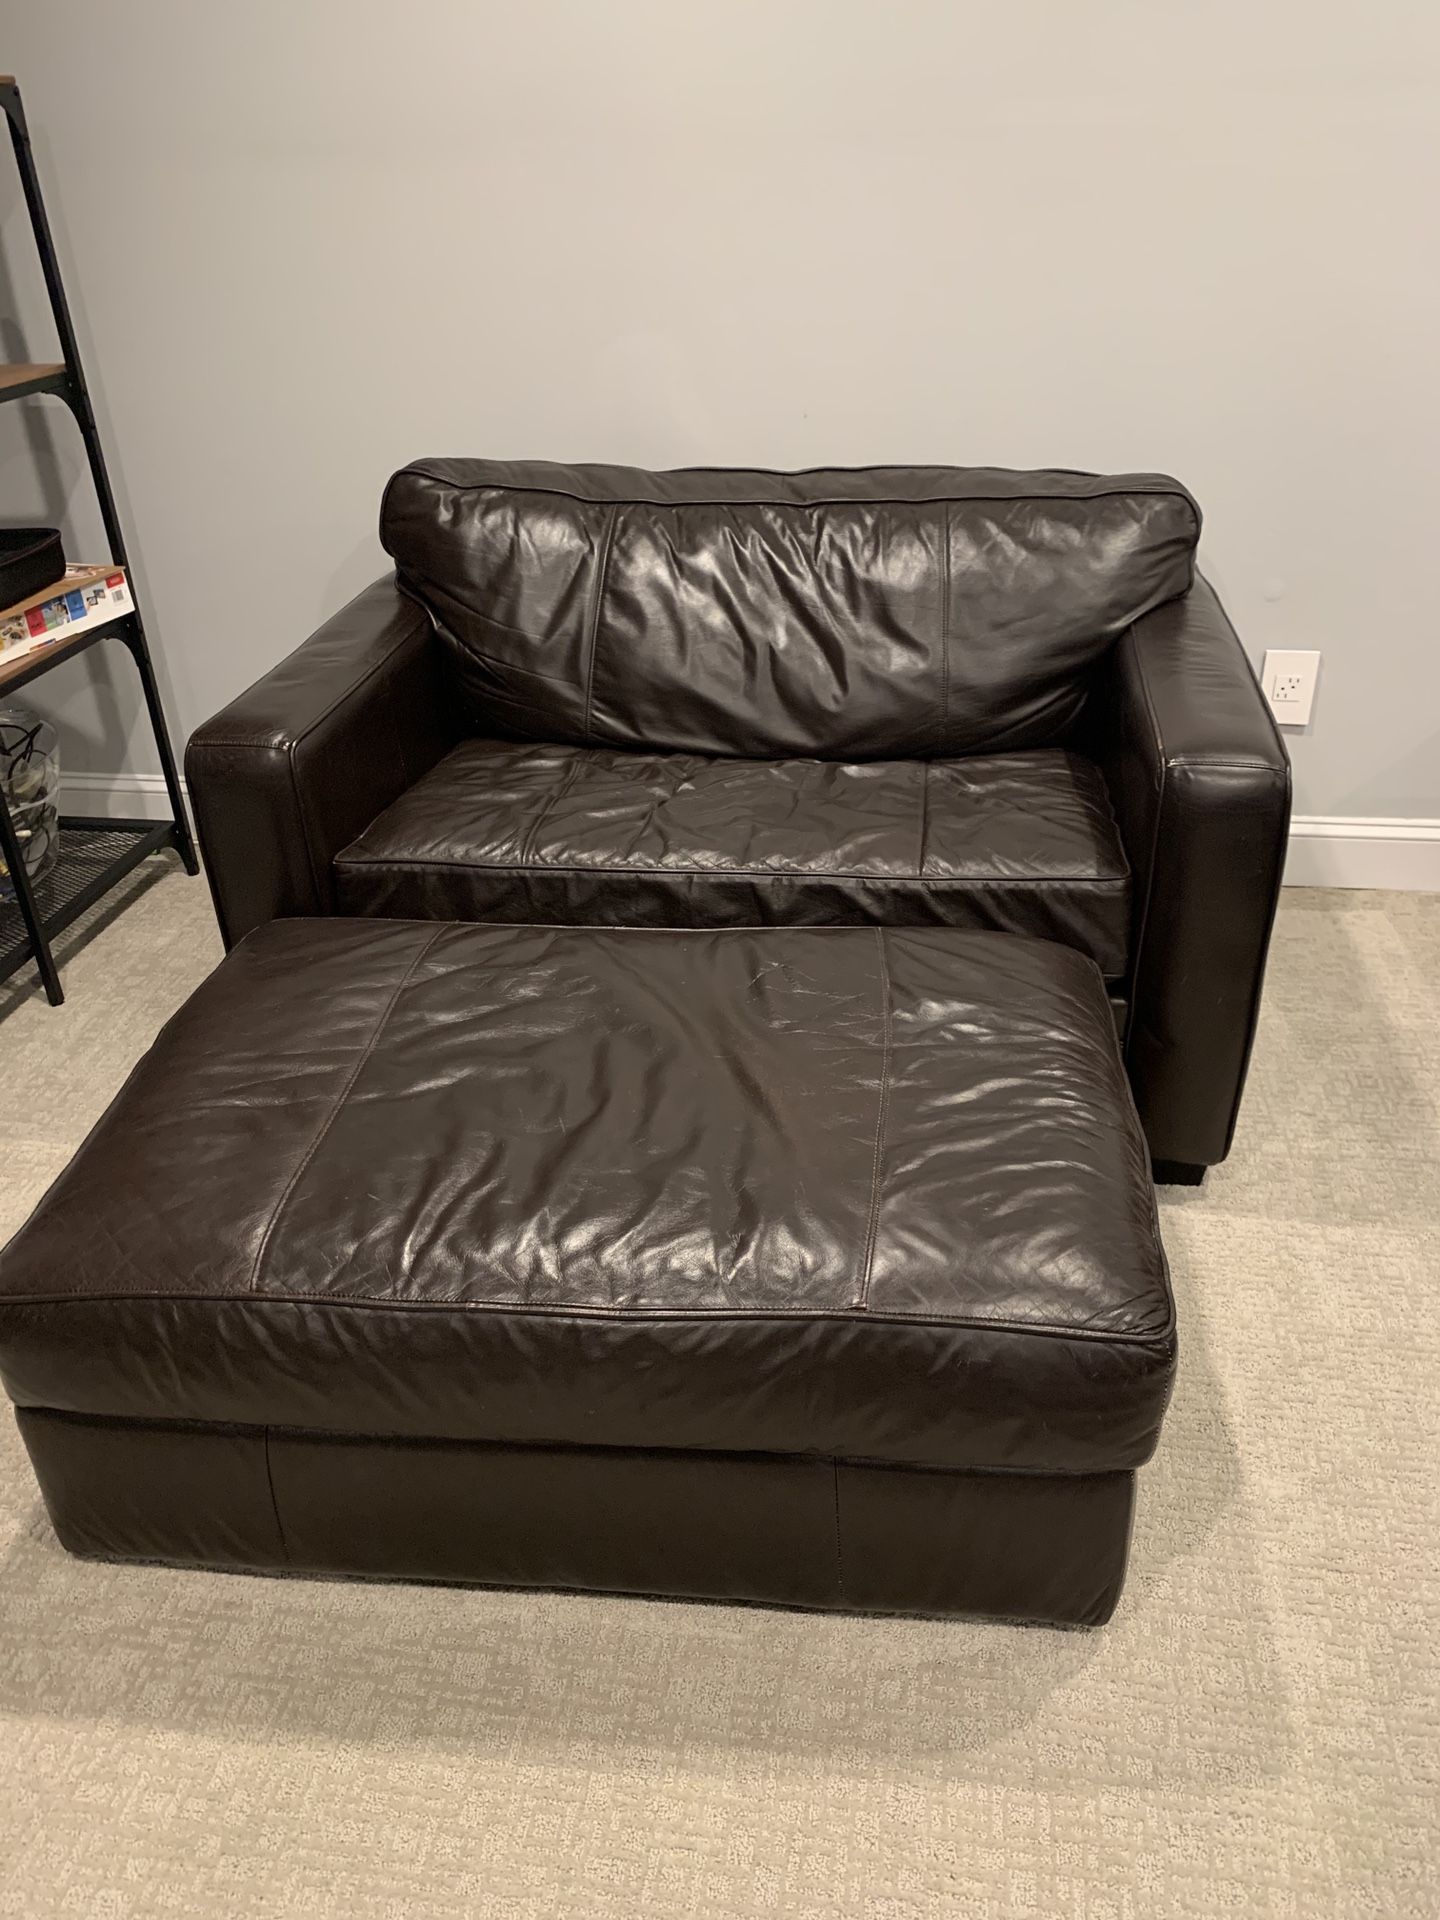 Havertys Leather oversized chair with twin bed pull out